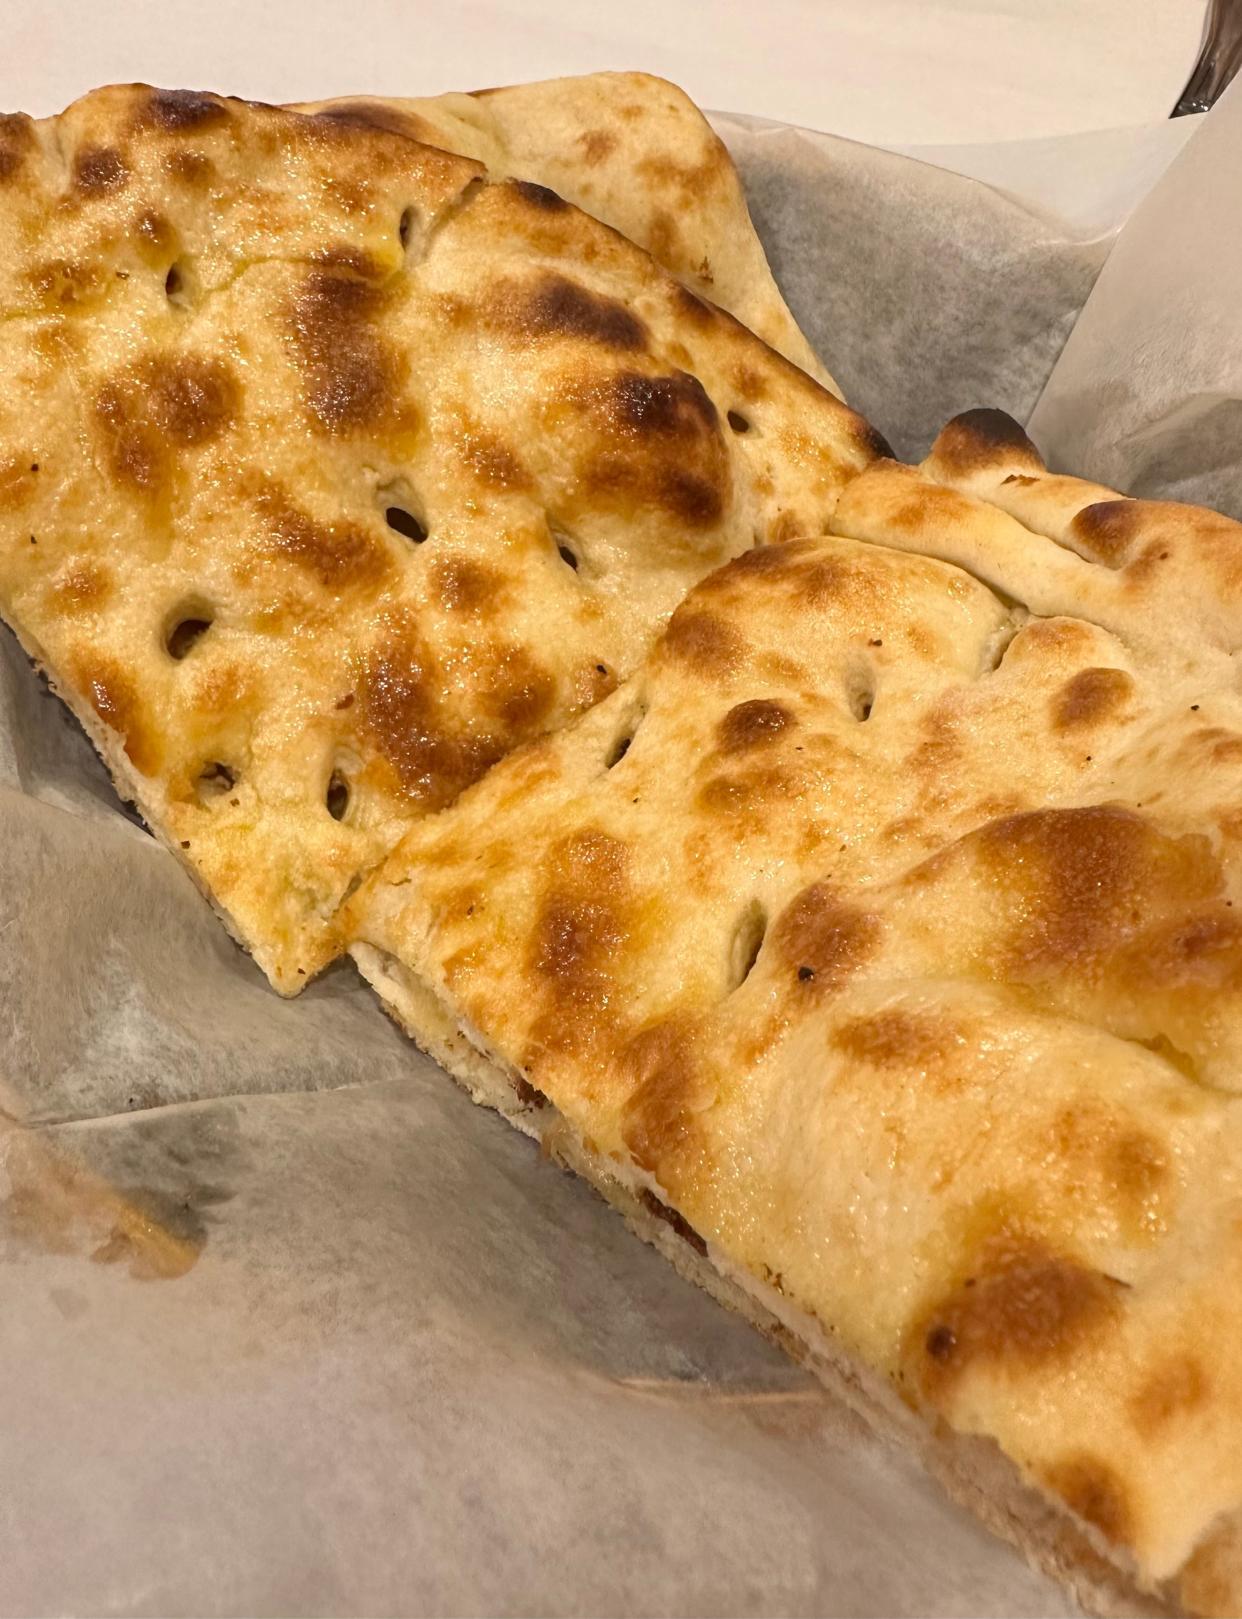 Naan and laacha paratha, served warm, are two of the breads we enjoyed at a recent visit to Bombay Sitar in Jackson Township